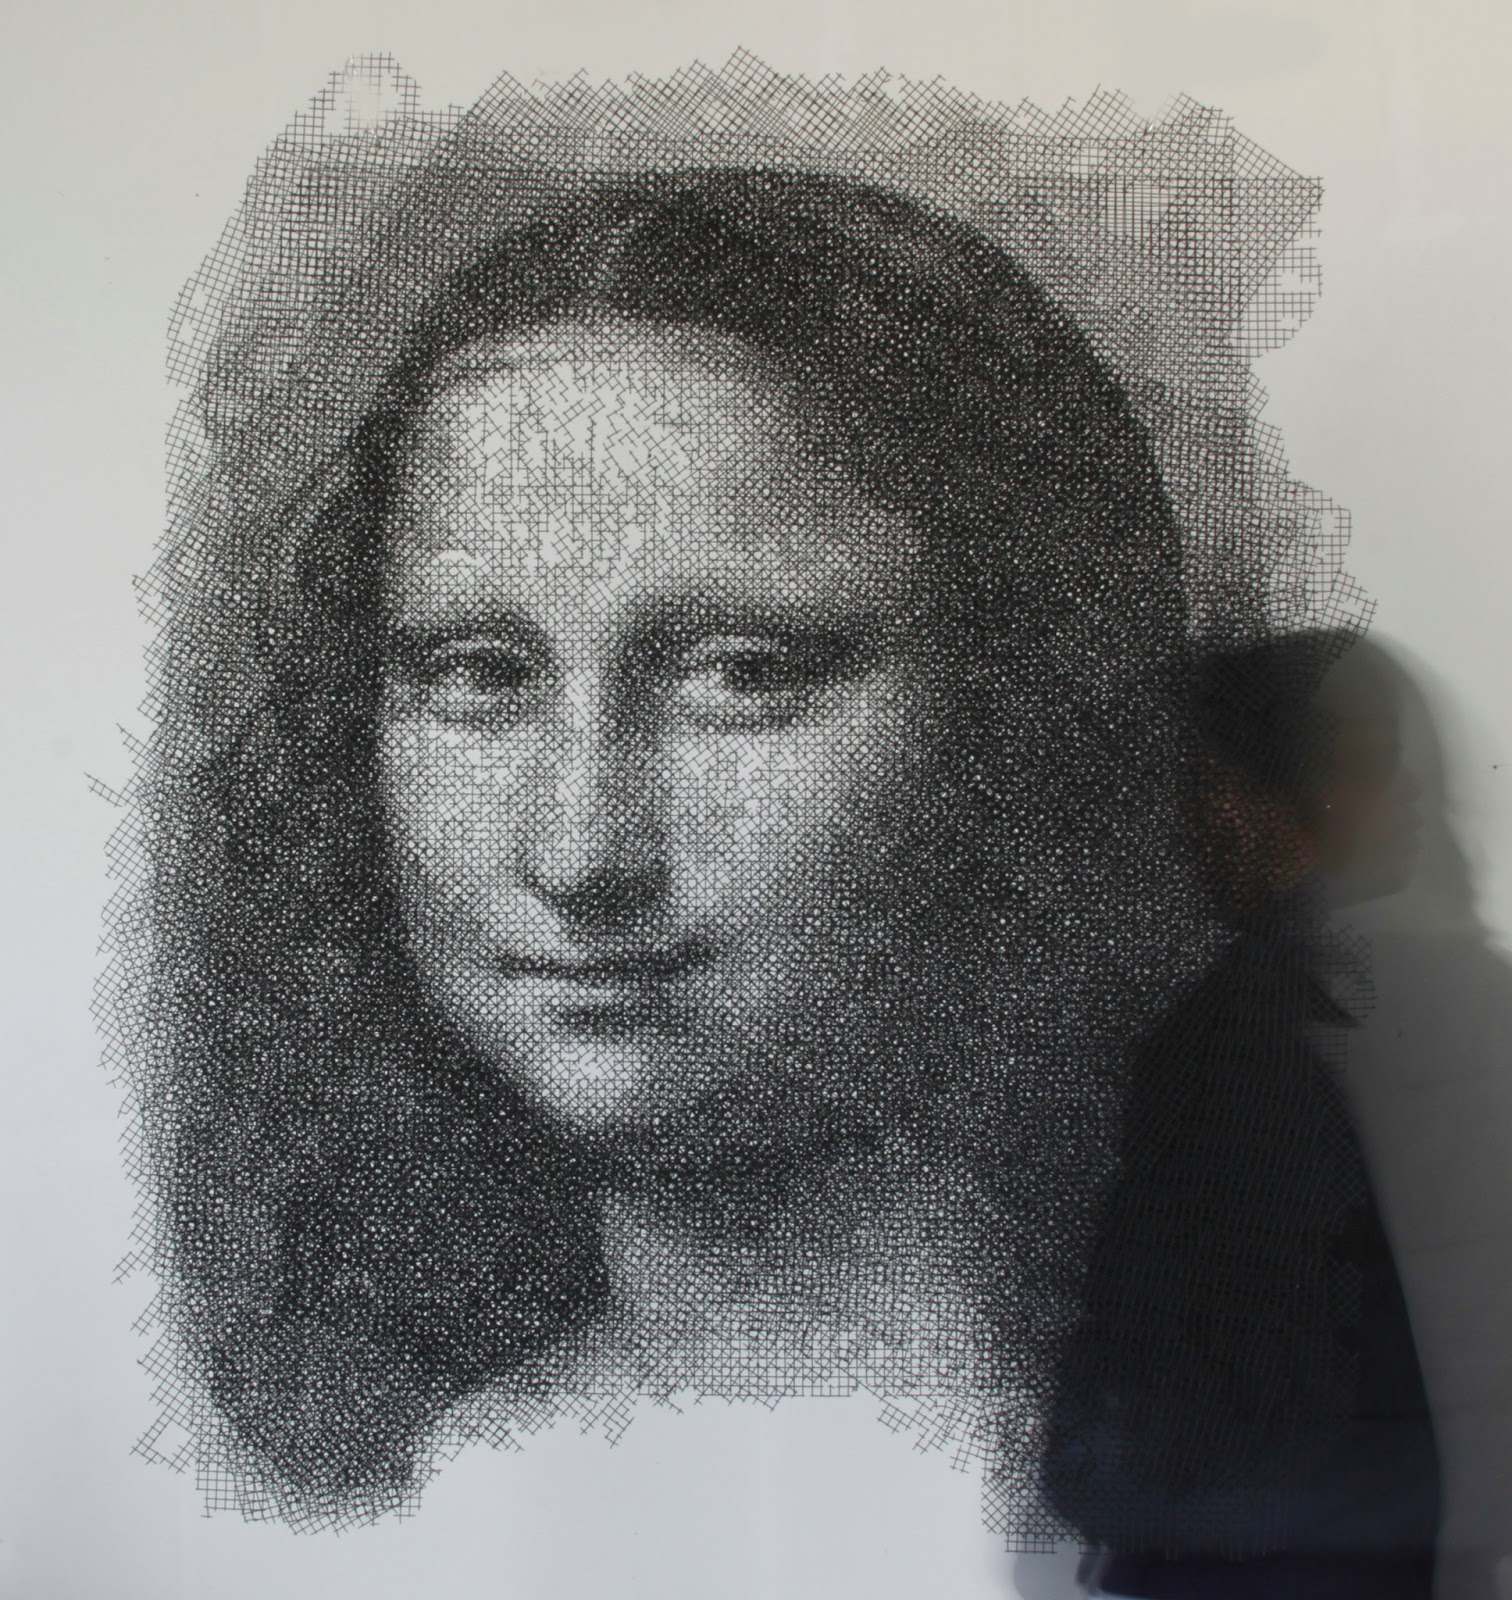 ‘Mona Lisa’ by Seung Mo Park - wire sculpture